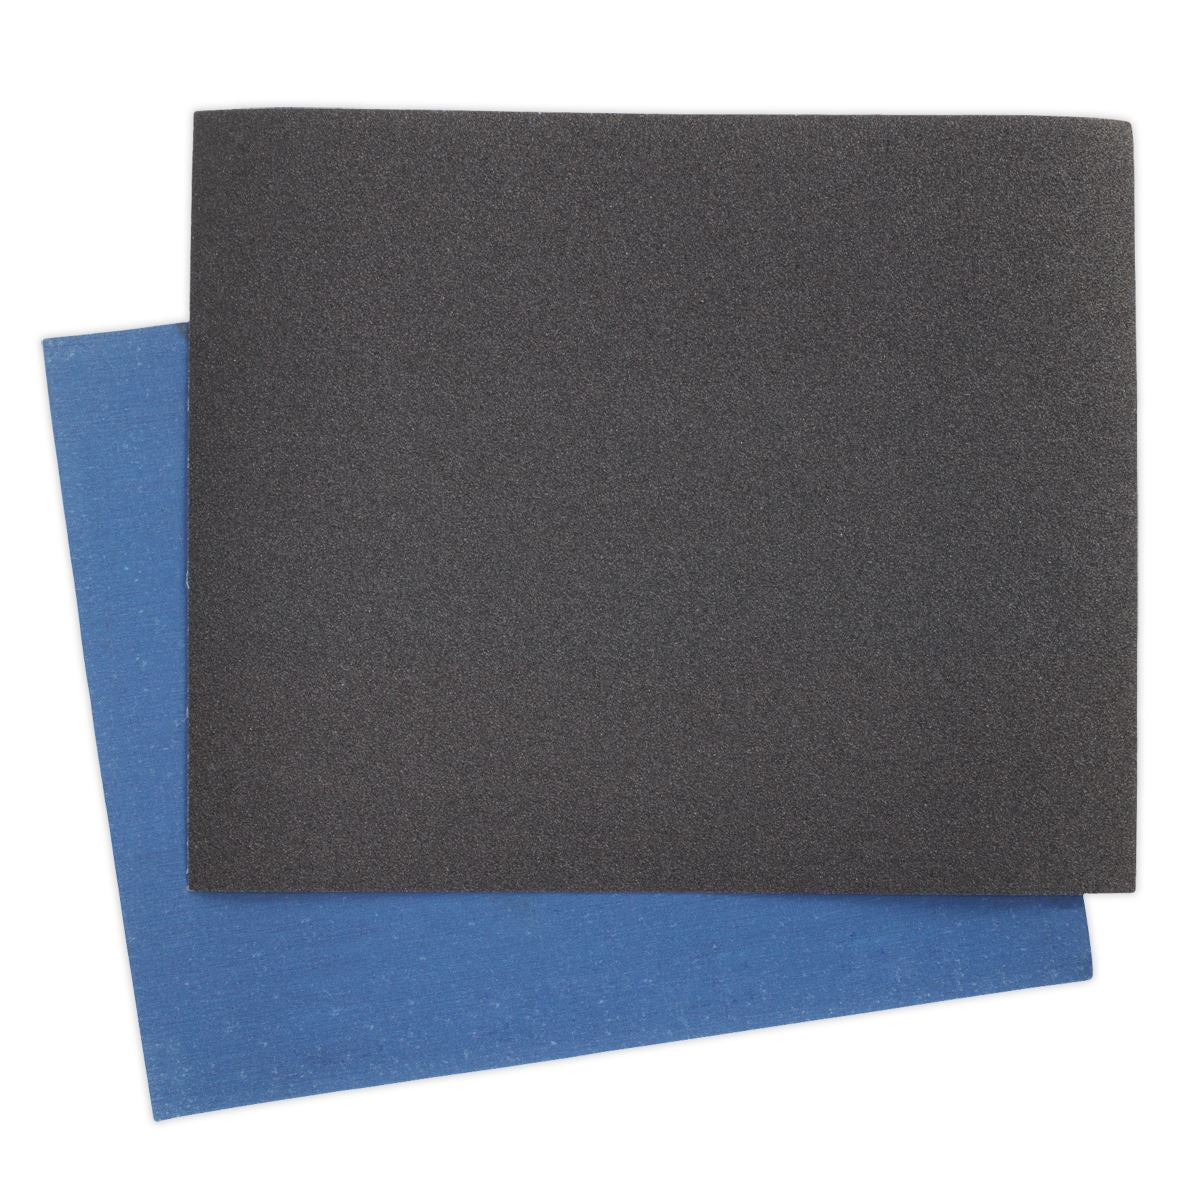 Sealey Emery Sheet Blue Twill 230 x 280mm 120Grit Pack of 25